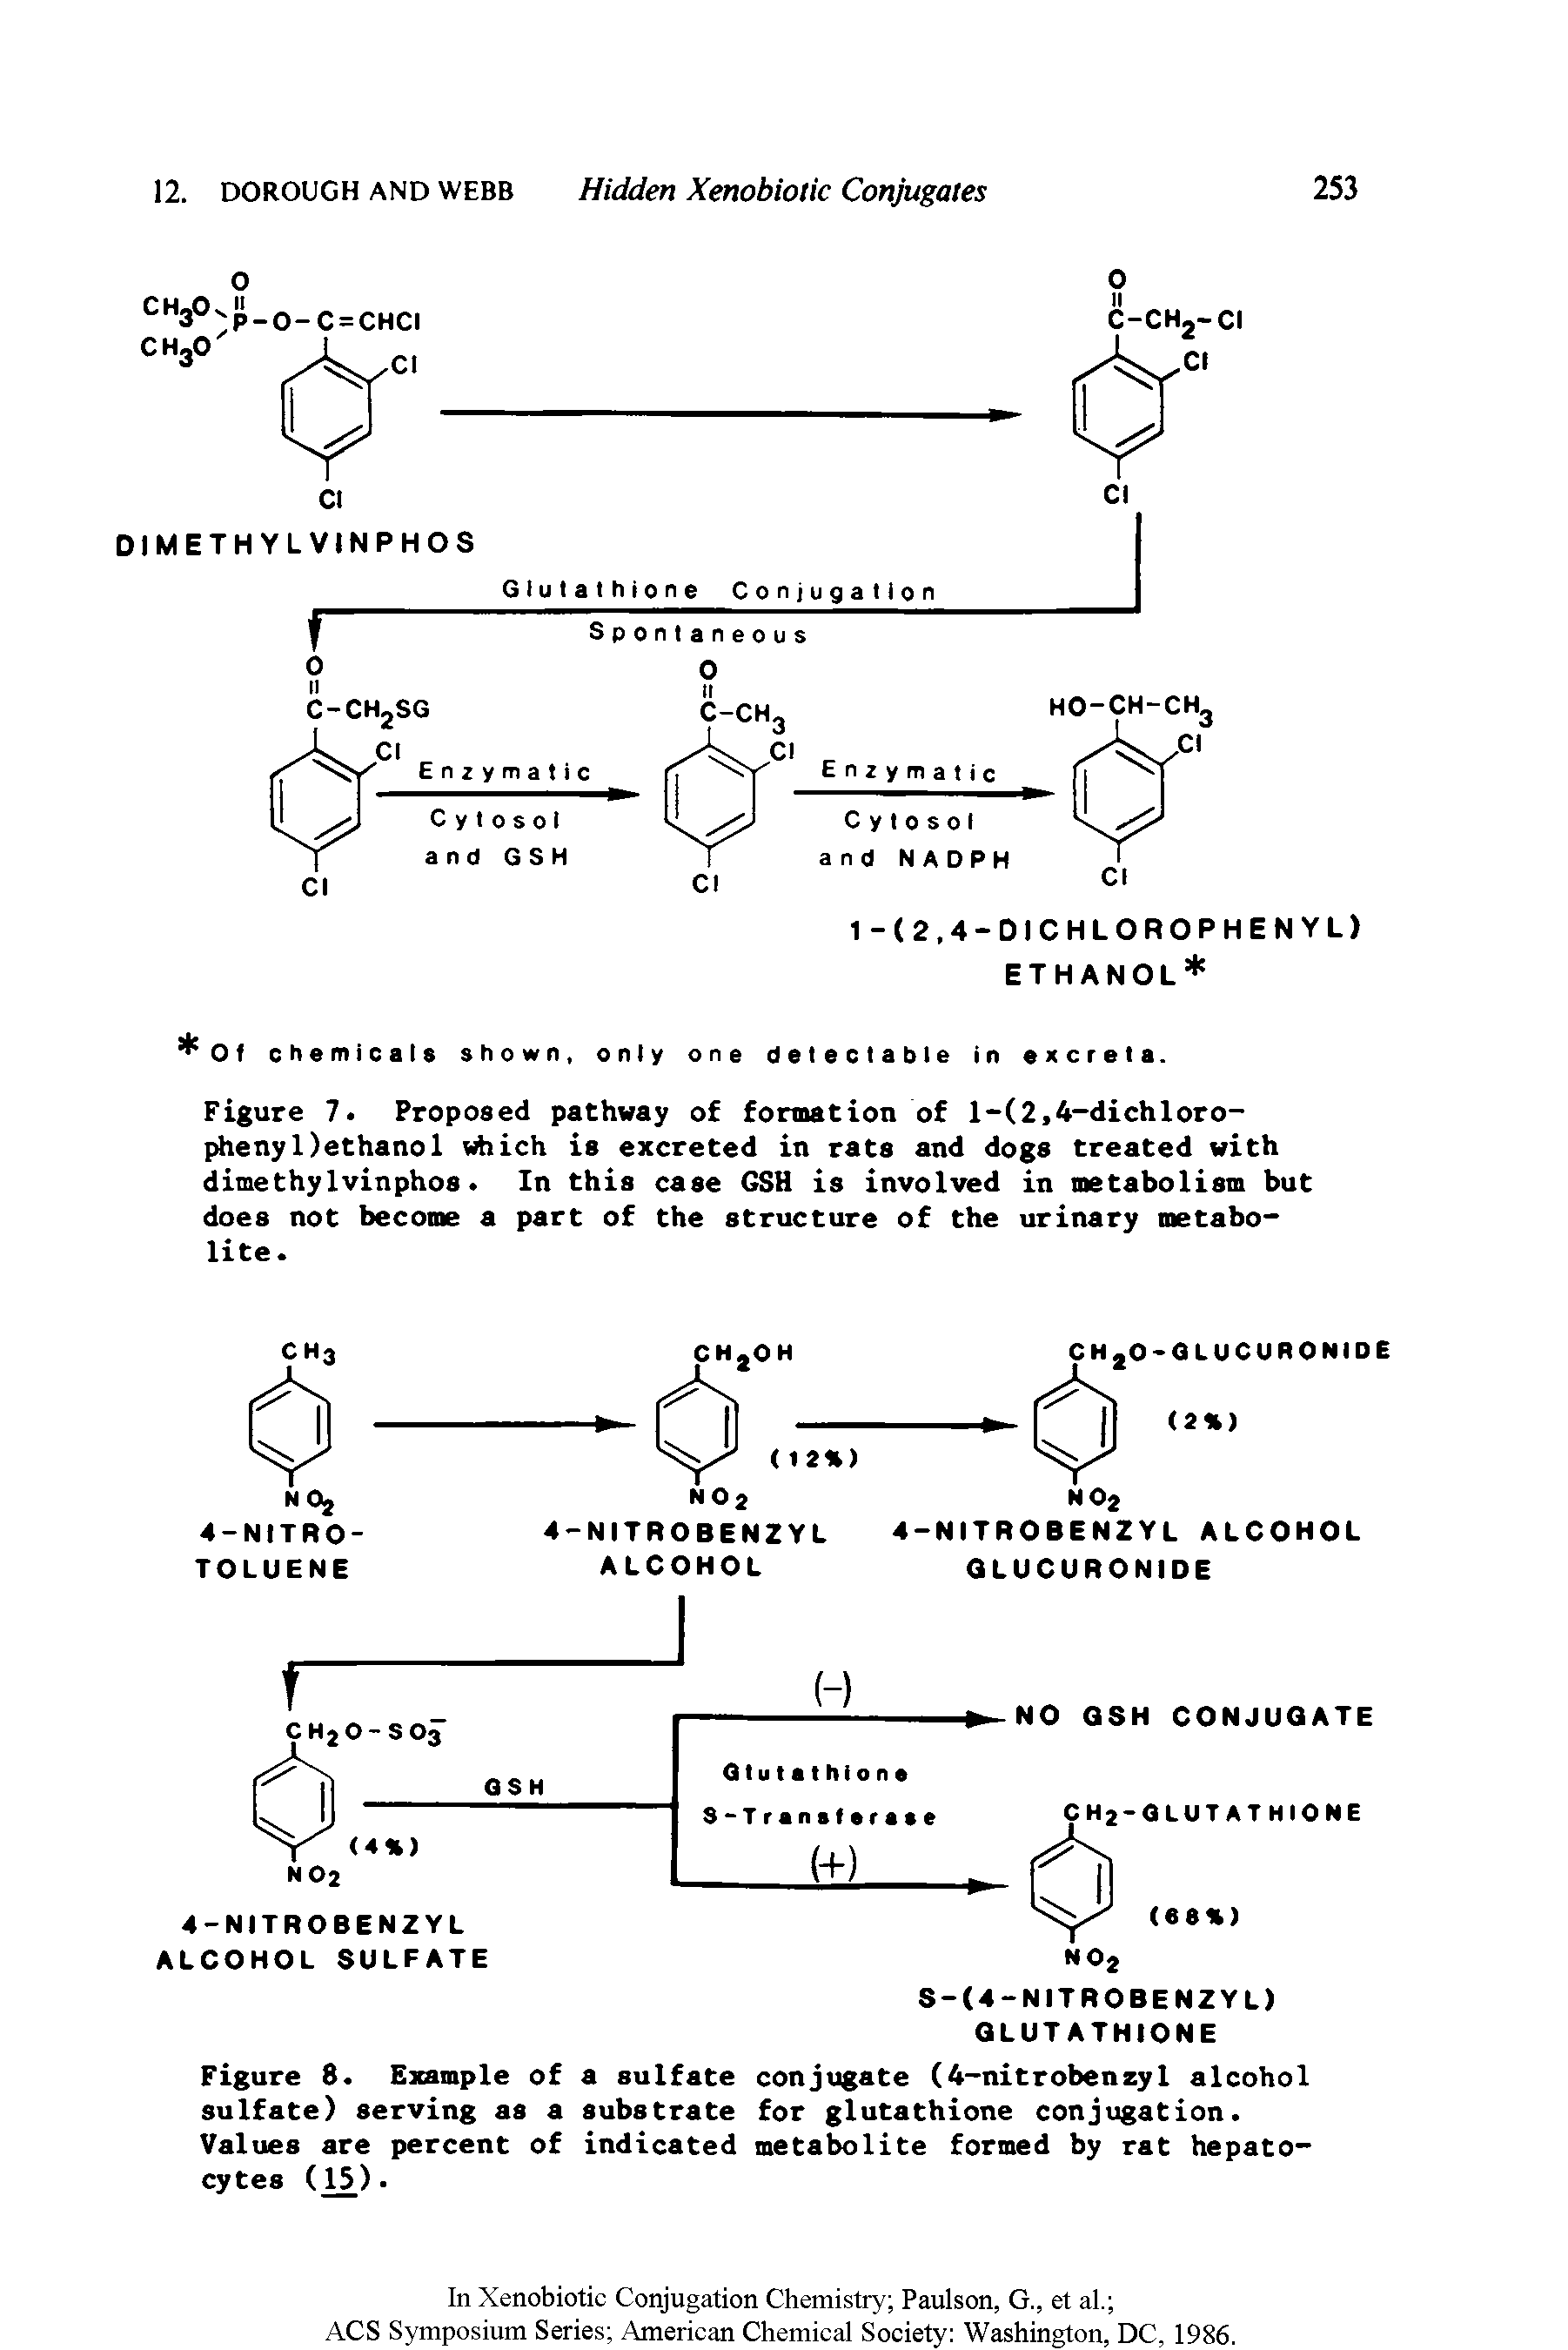 Figure 7. Proposed pathway of formation of l-(2,4-dichloro-phenyDethanol which is excreted in rats and dogs treated with dimethyIvinphos. In this case CSH is involved in metabolism but does not become a part of the structure of the urinary metabolite.